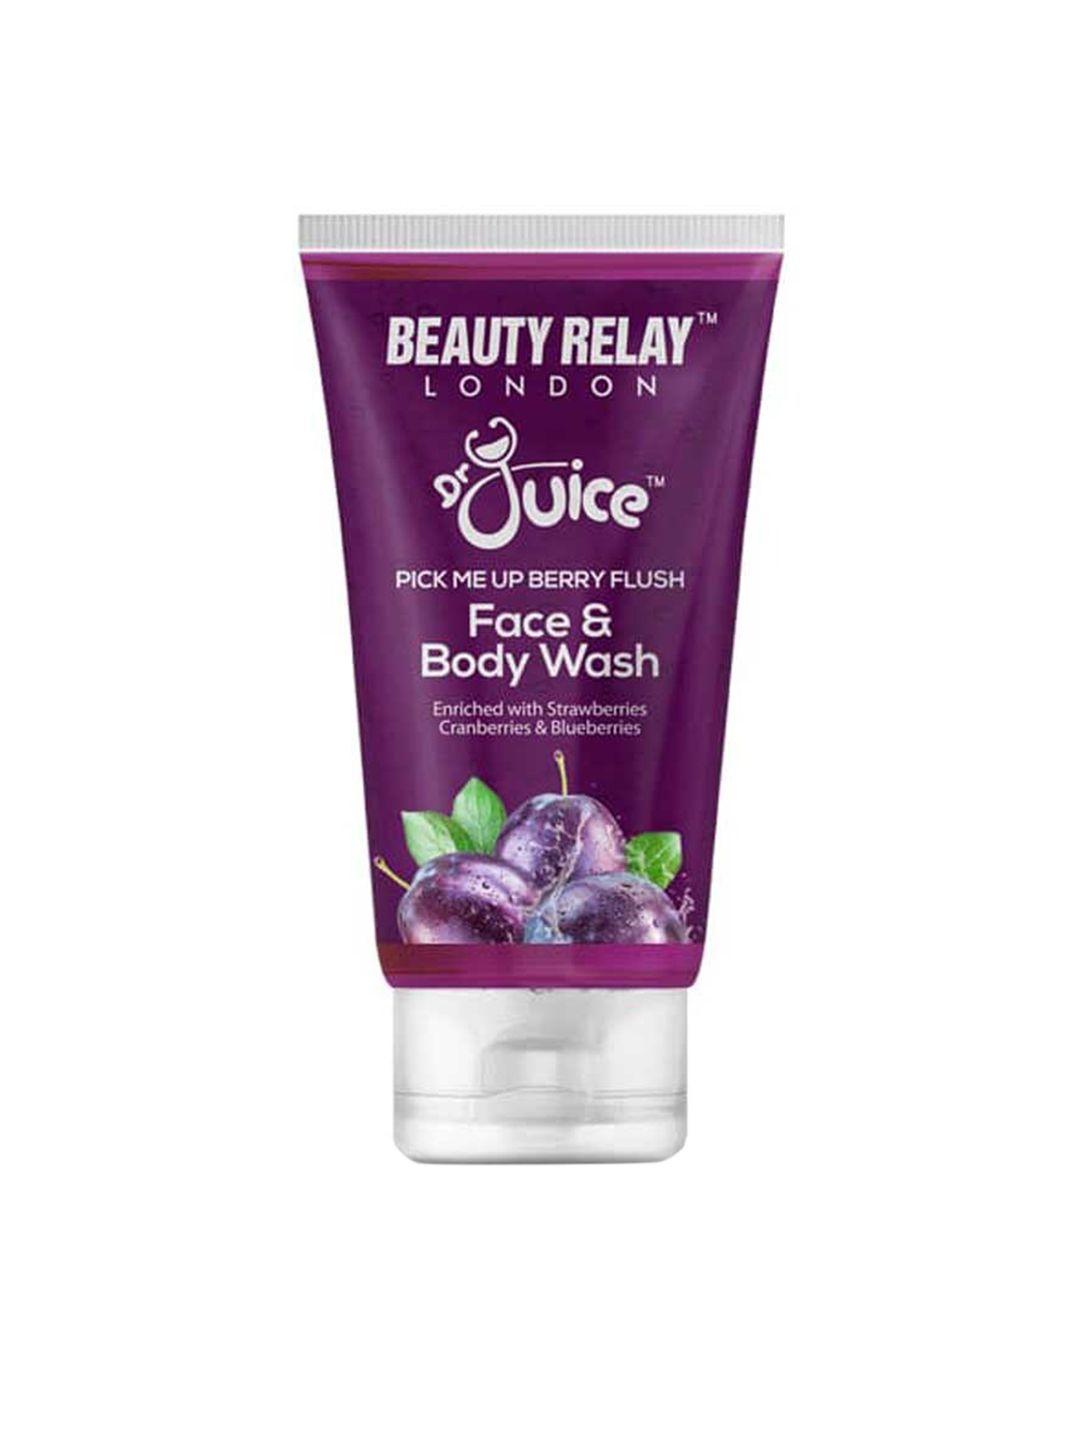 beautyrelay london dr juice pick me up berry flush face & body wash 200ml